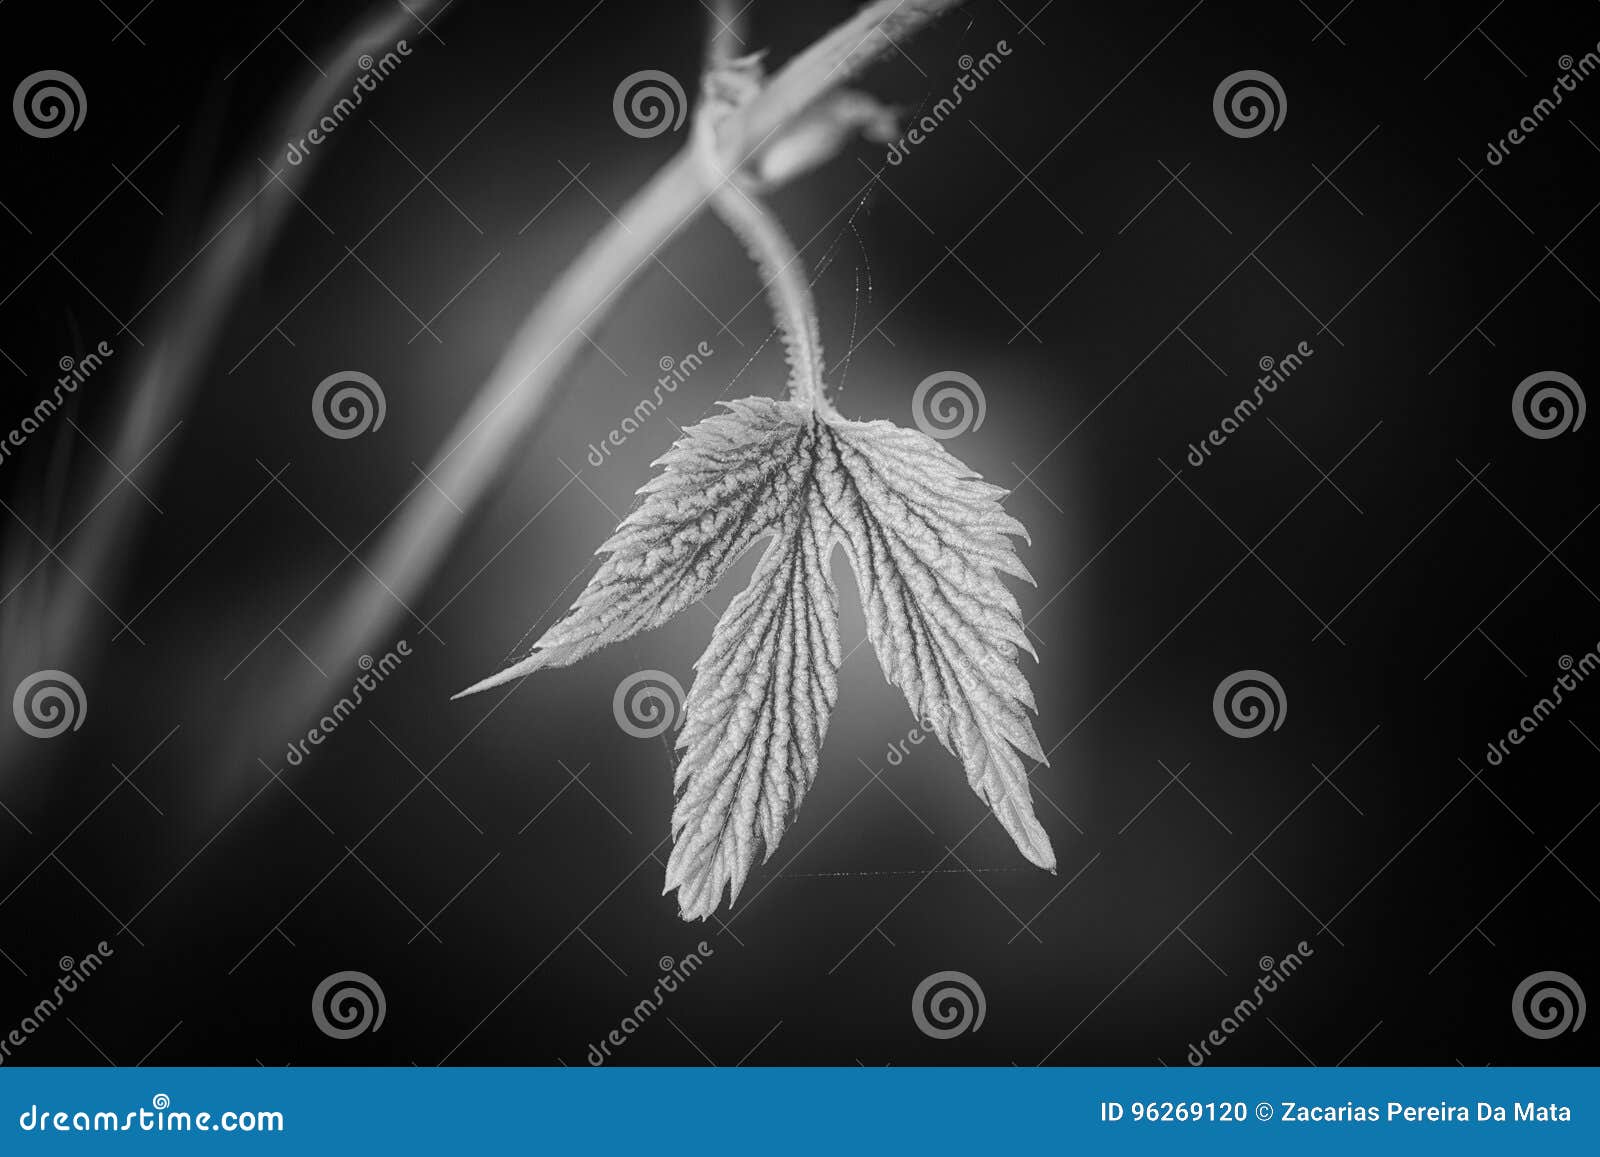 Black and White Leaf Background Stock Photo - Image of wallpaper